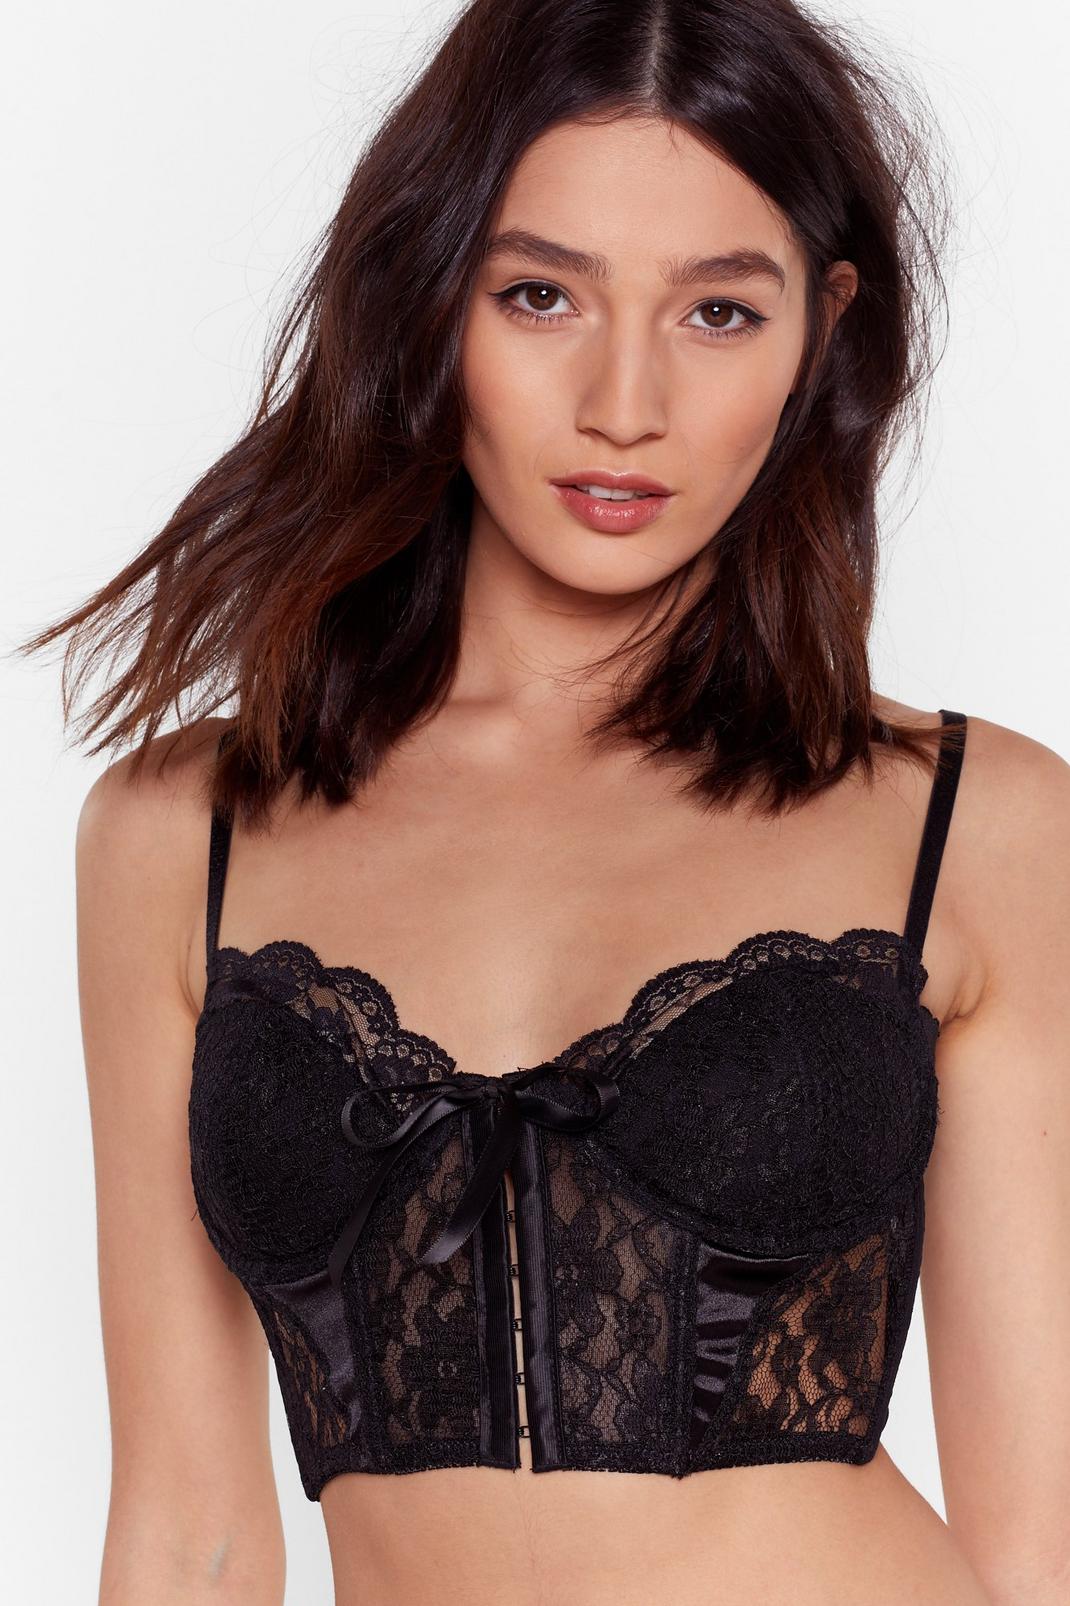 Sweetheart Lace Bralette, Off White